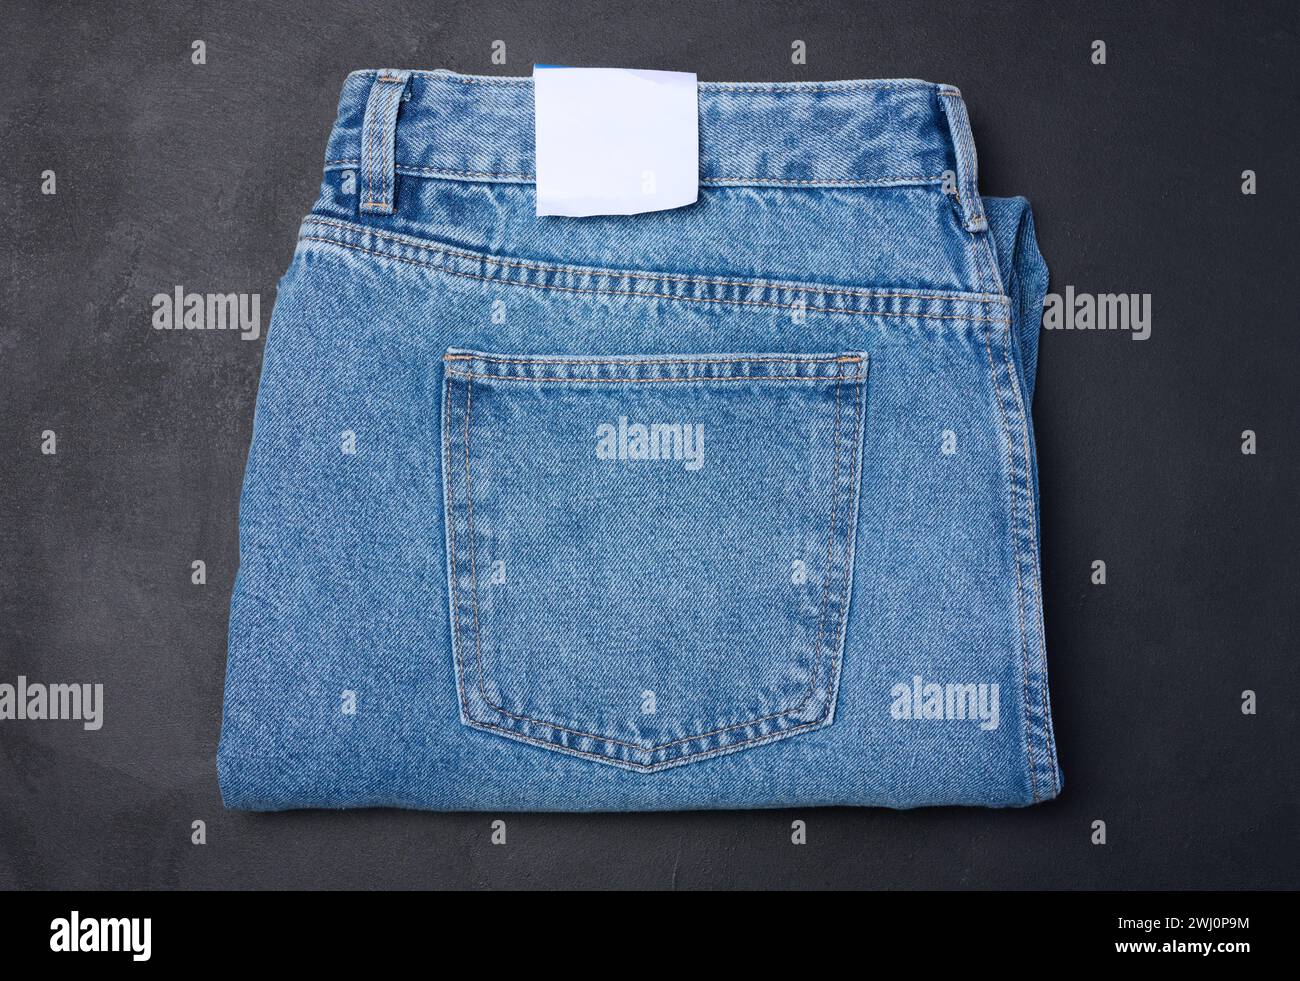 Folded blue jeans on a black background, top view Stock Photo